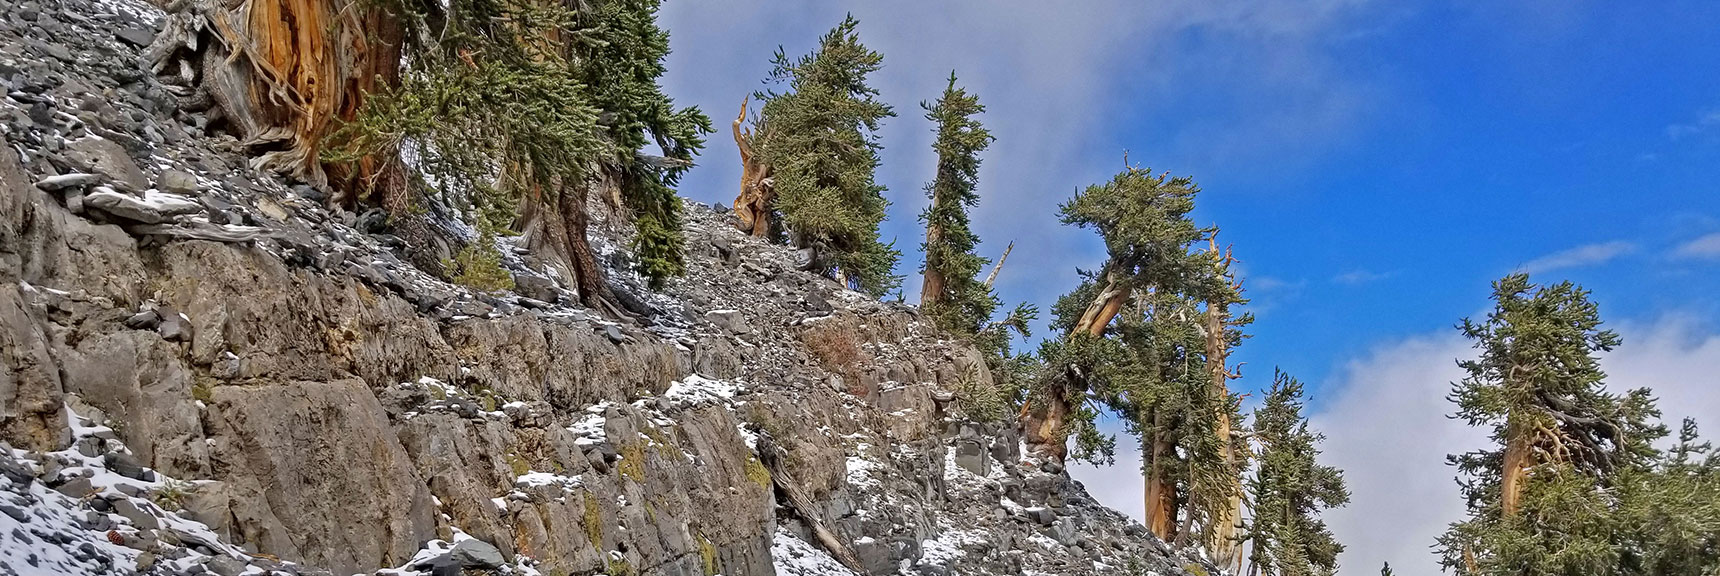 Bristlecone Pines Appear to Grow and Thrive Out of Rock and Snow | Charleston Peak Loop October Snow Dusting | Mt. Charleston Wilderness | Spring Mountains, Nevada